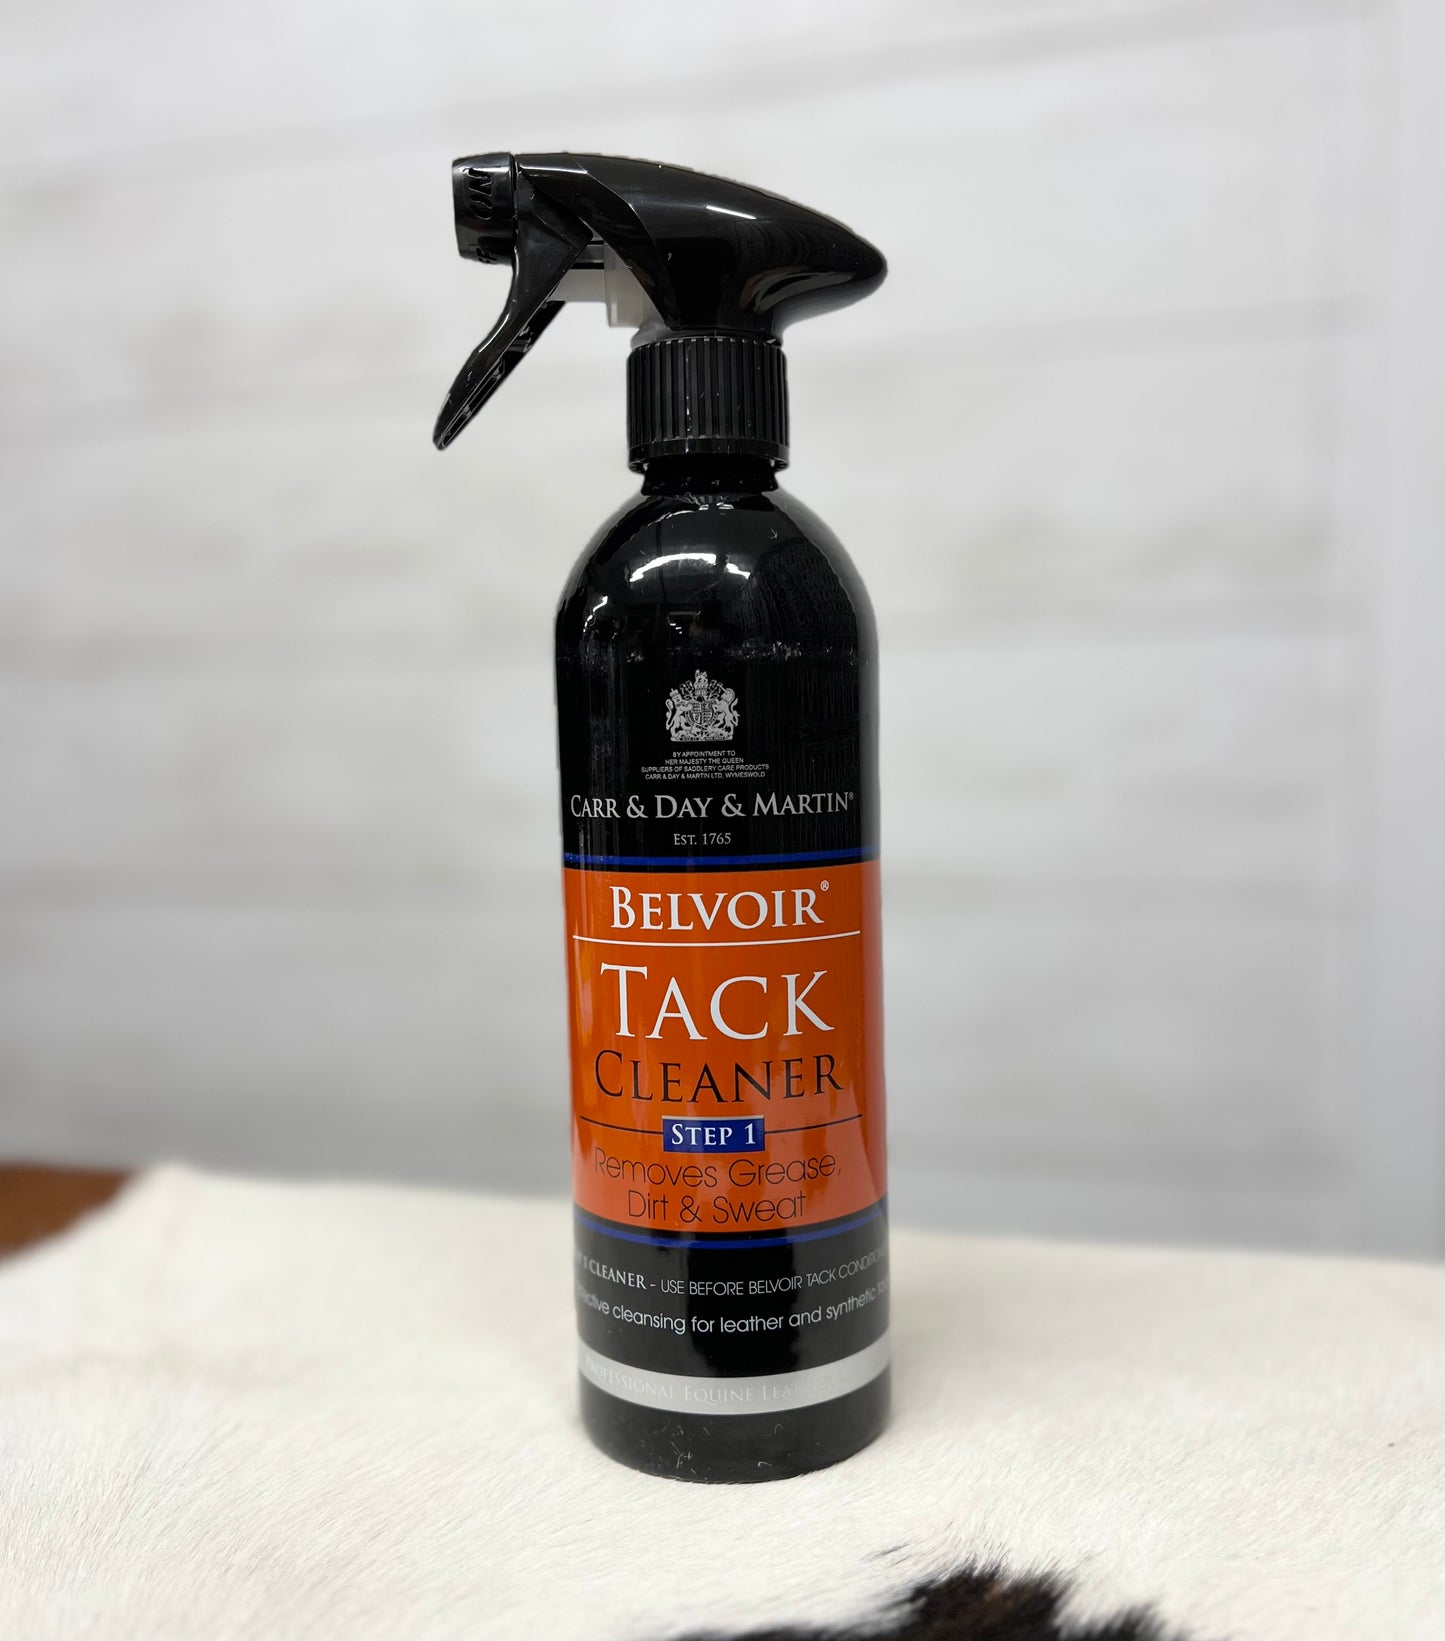 Belvoir Leather Tack Cleaner Spray